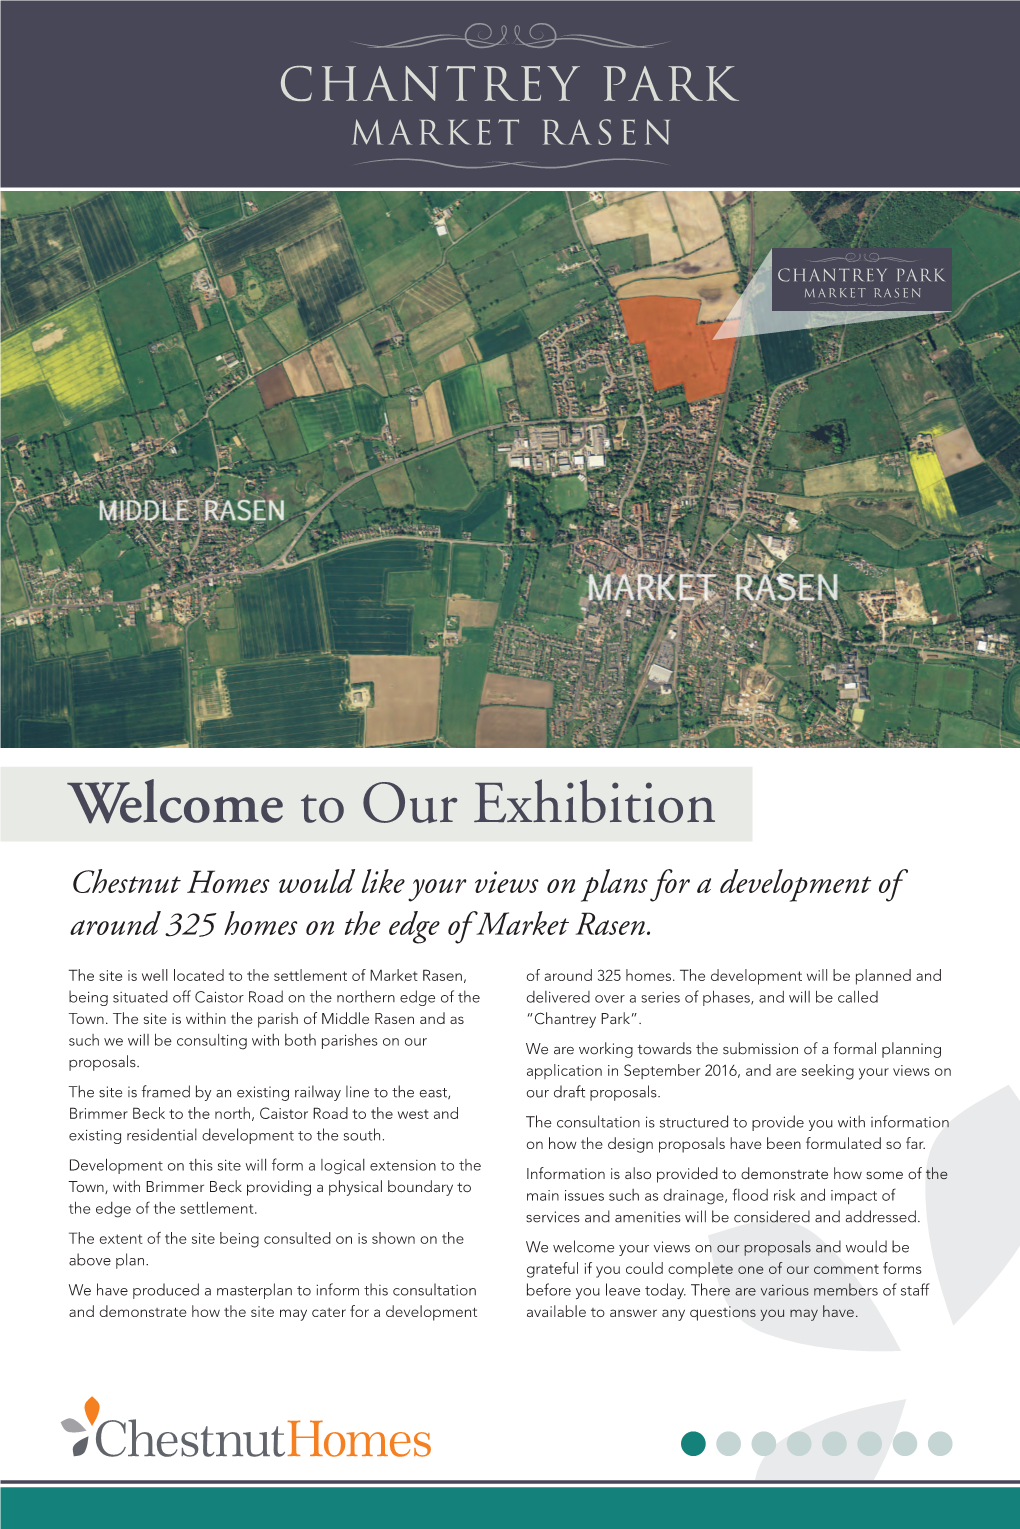 Chestnut Homes Would Like Your Views on Plans for a Development of Around 325 Homes on the Edge of Market Rasen